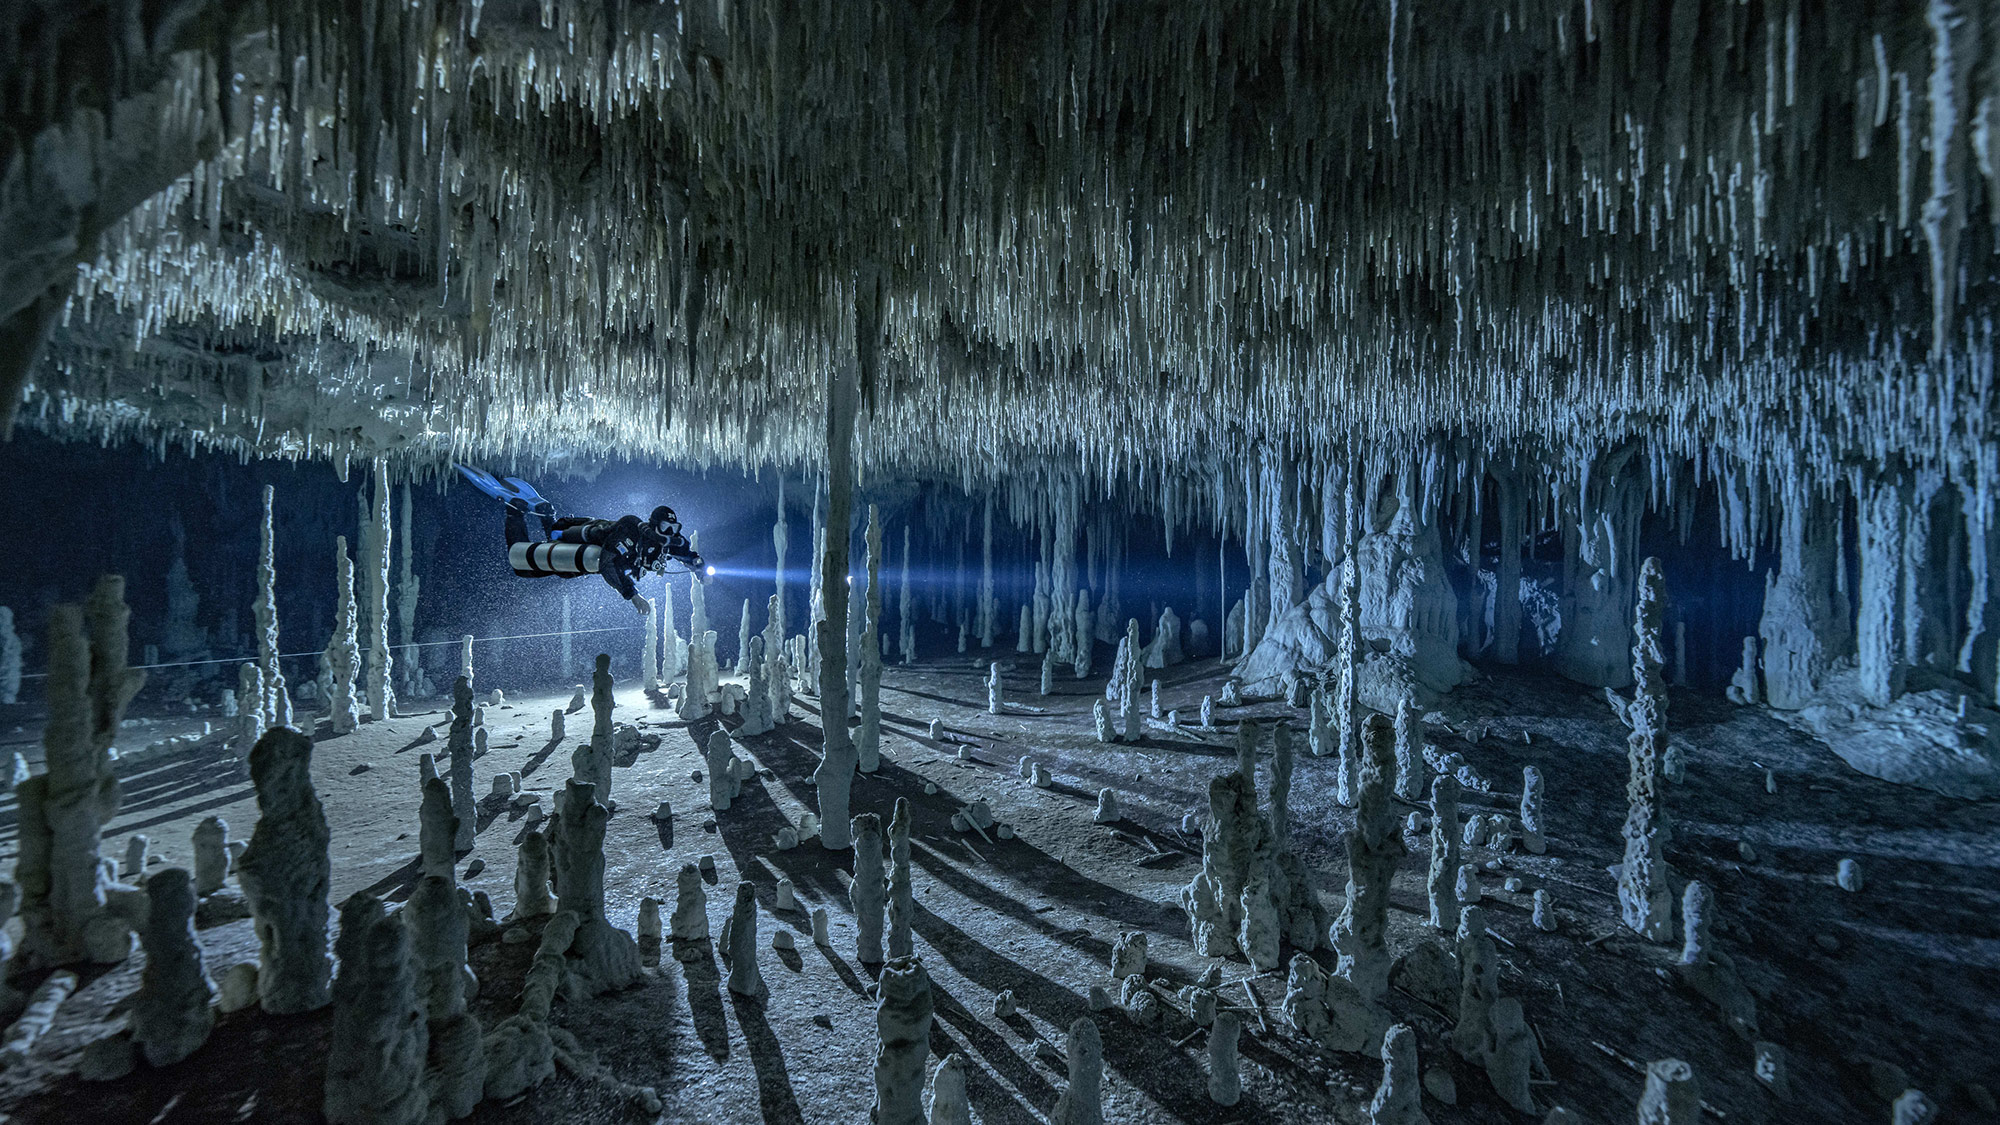 A scuba diver shines a flashlight in a flooded cave filled with stalactites and stalagmites.